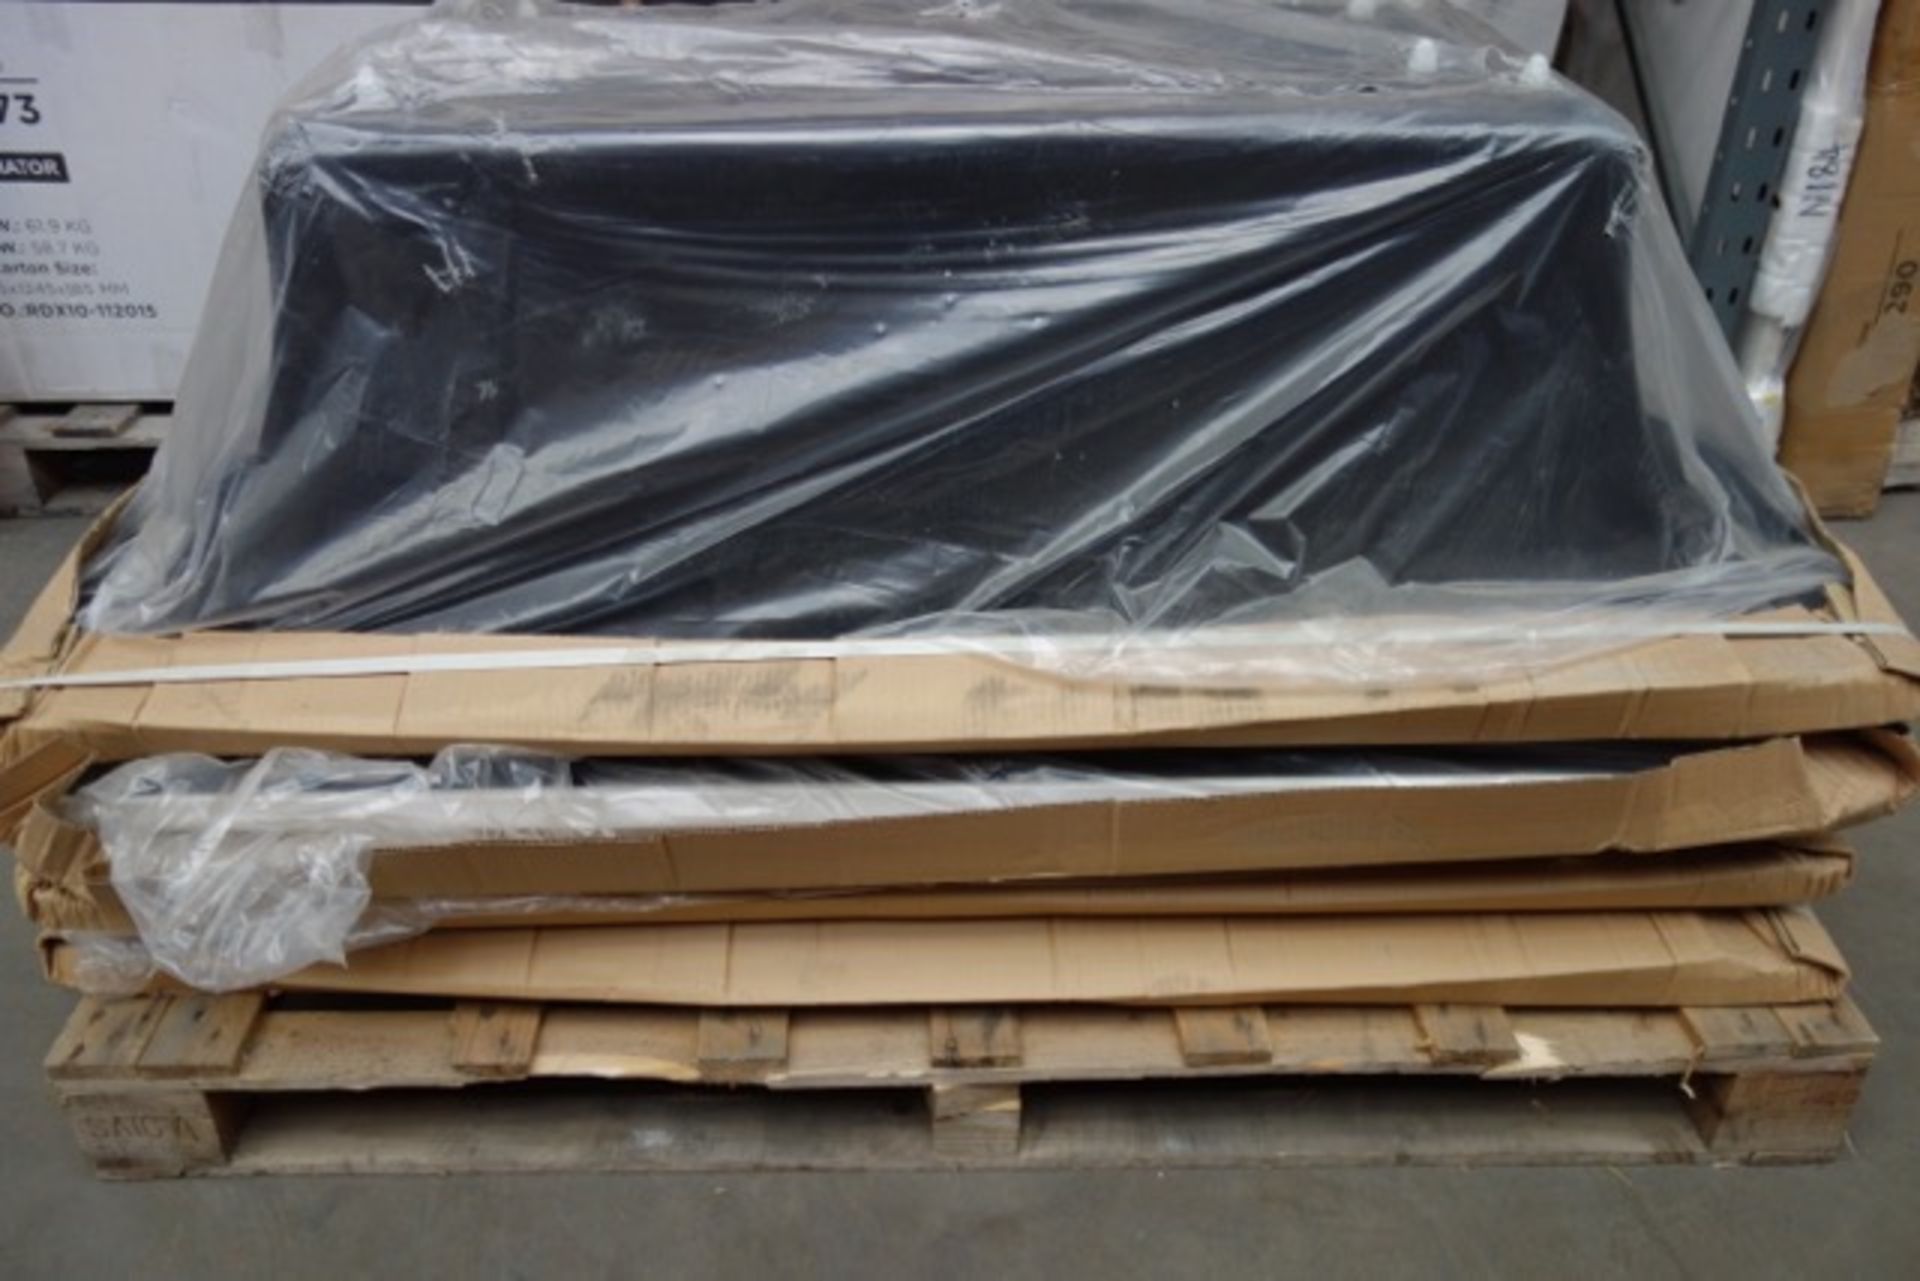 (2) PALLET TO CONTAIN 4 x BLACK FREESTANDING BATHS - NOTE: WAREHOUSE DAMAGED STOCK.